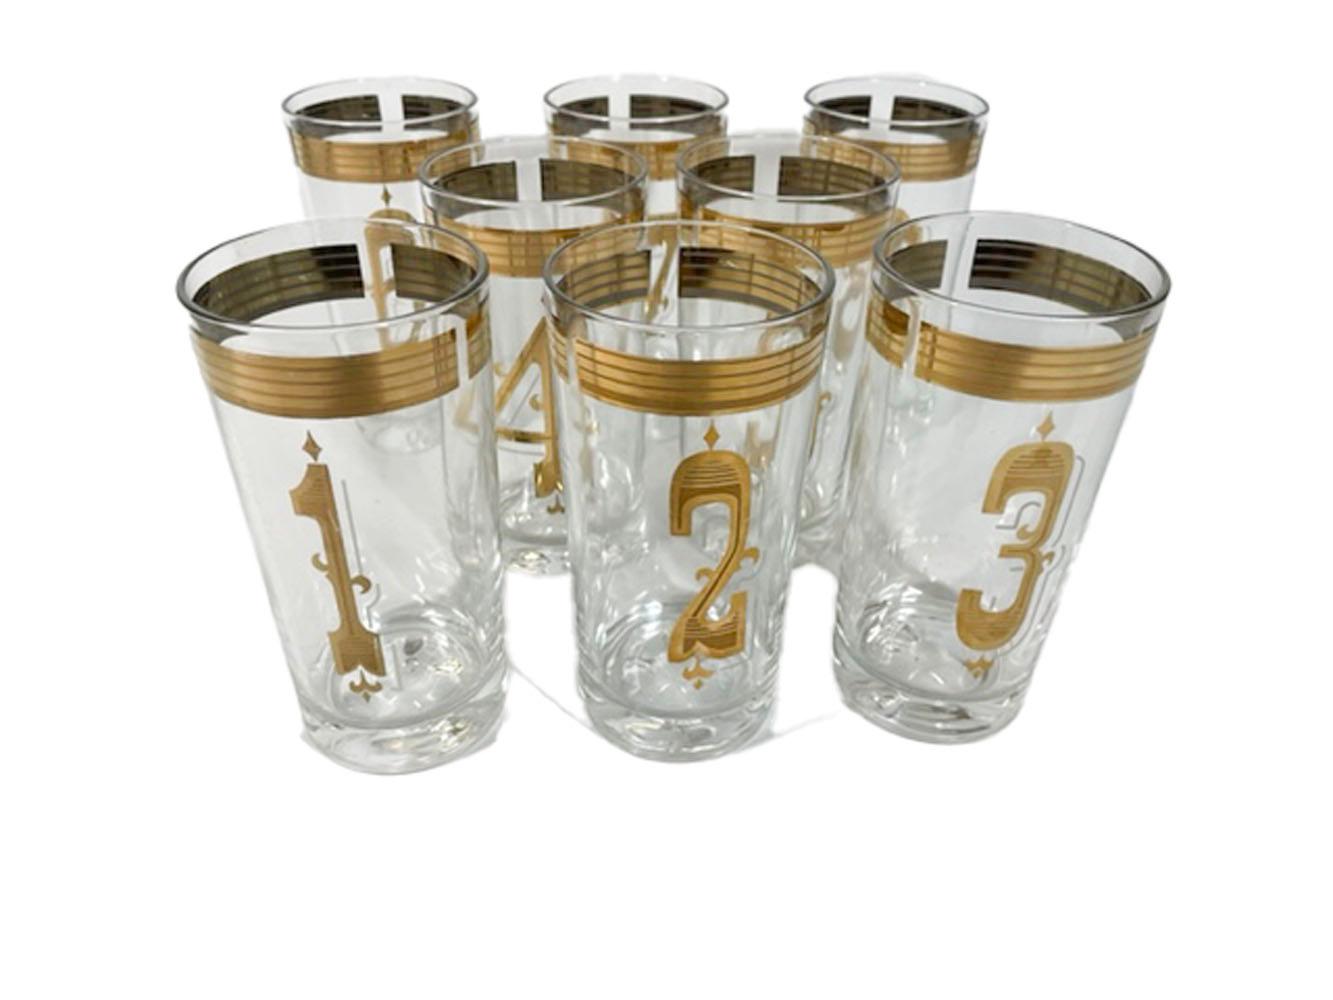 American Vintage By-the-numbers, Highball Glasses, Numbered 1 Thru 8 in 22 Karat Gold